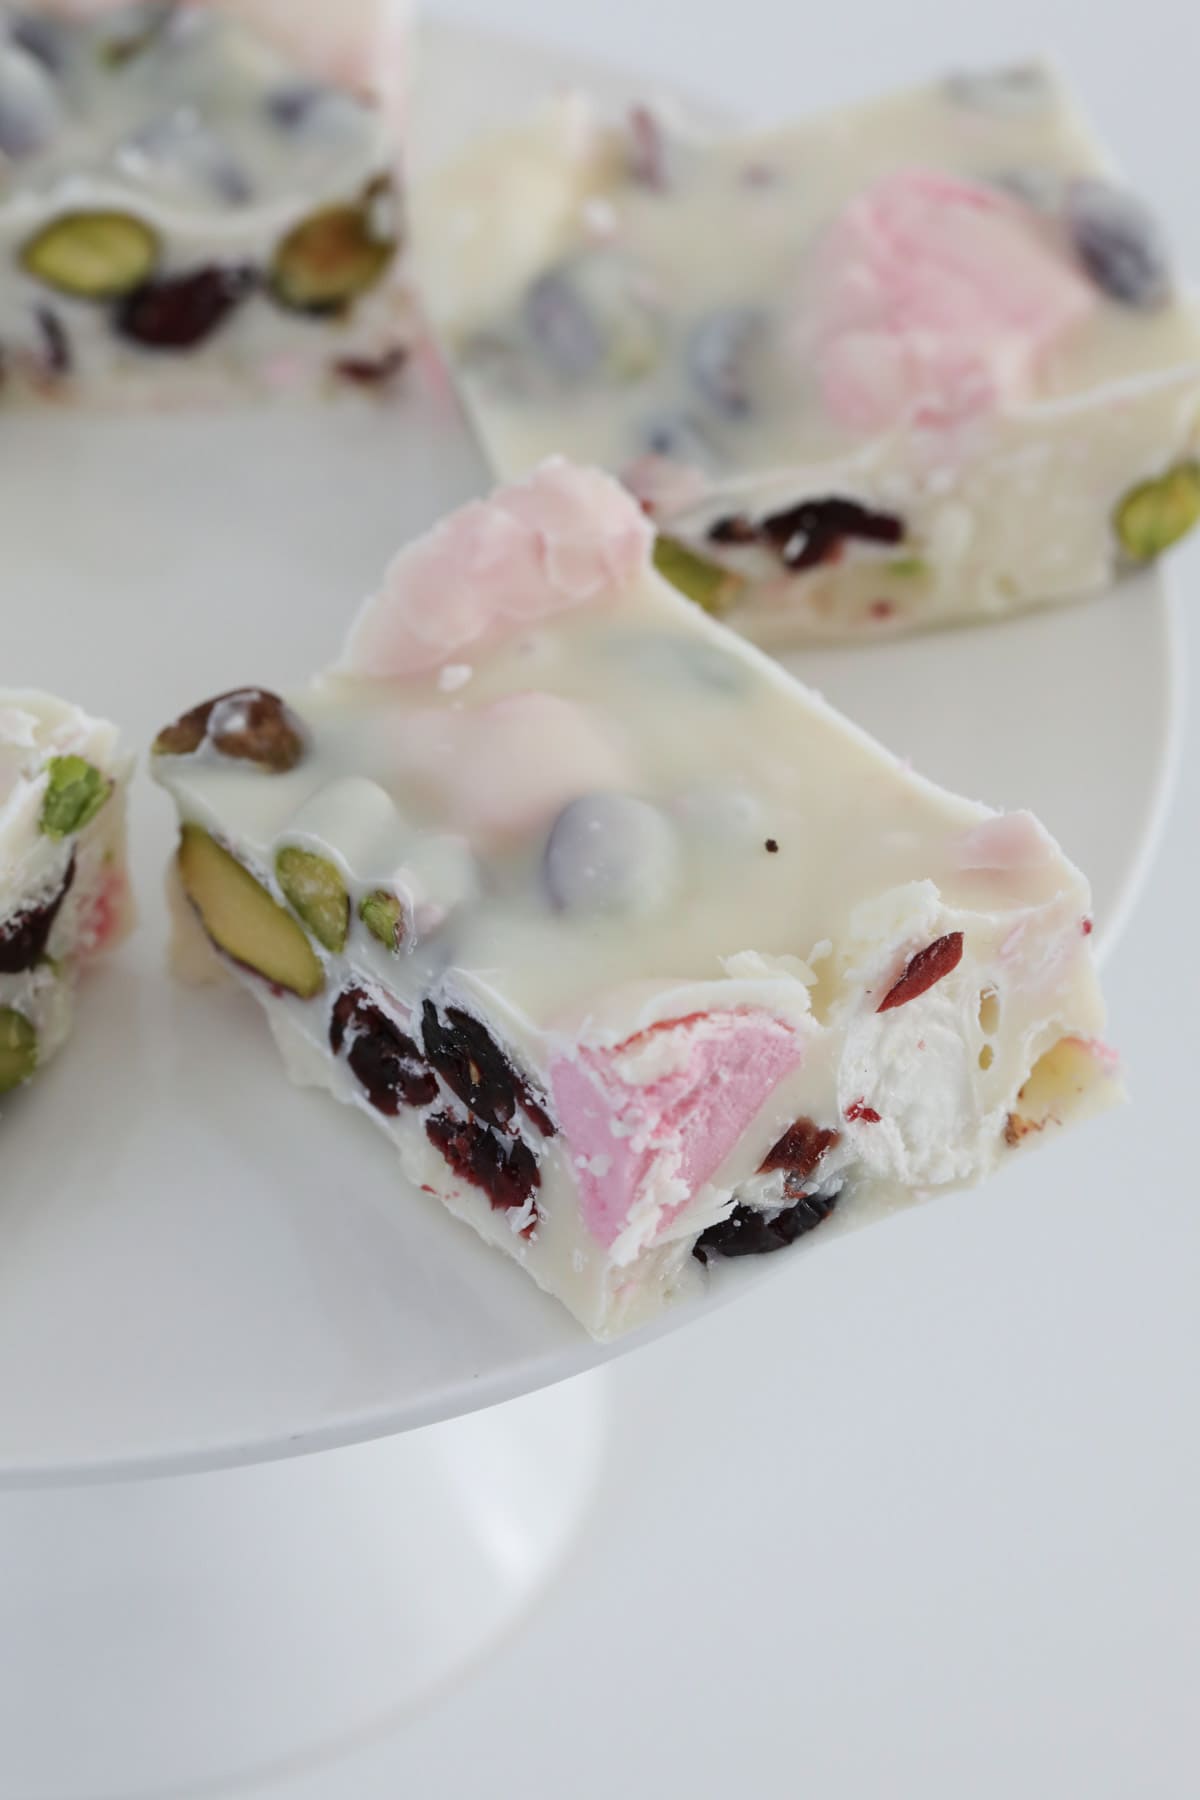 White chocolate and marshmallow slice pieces.